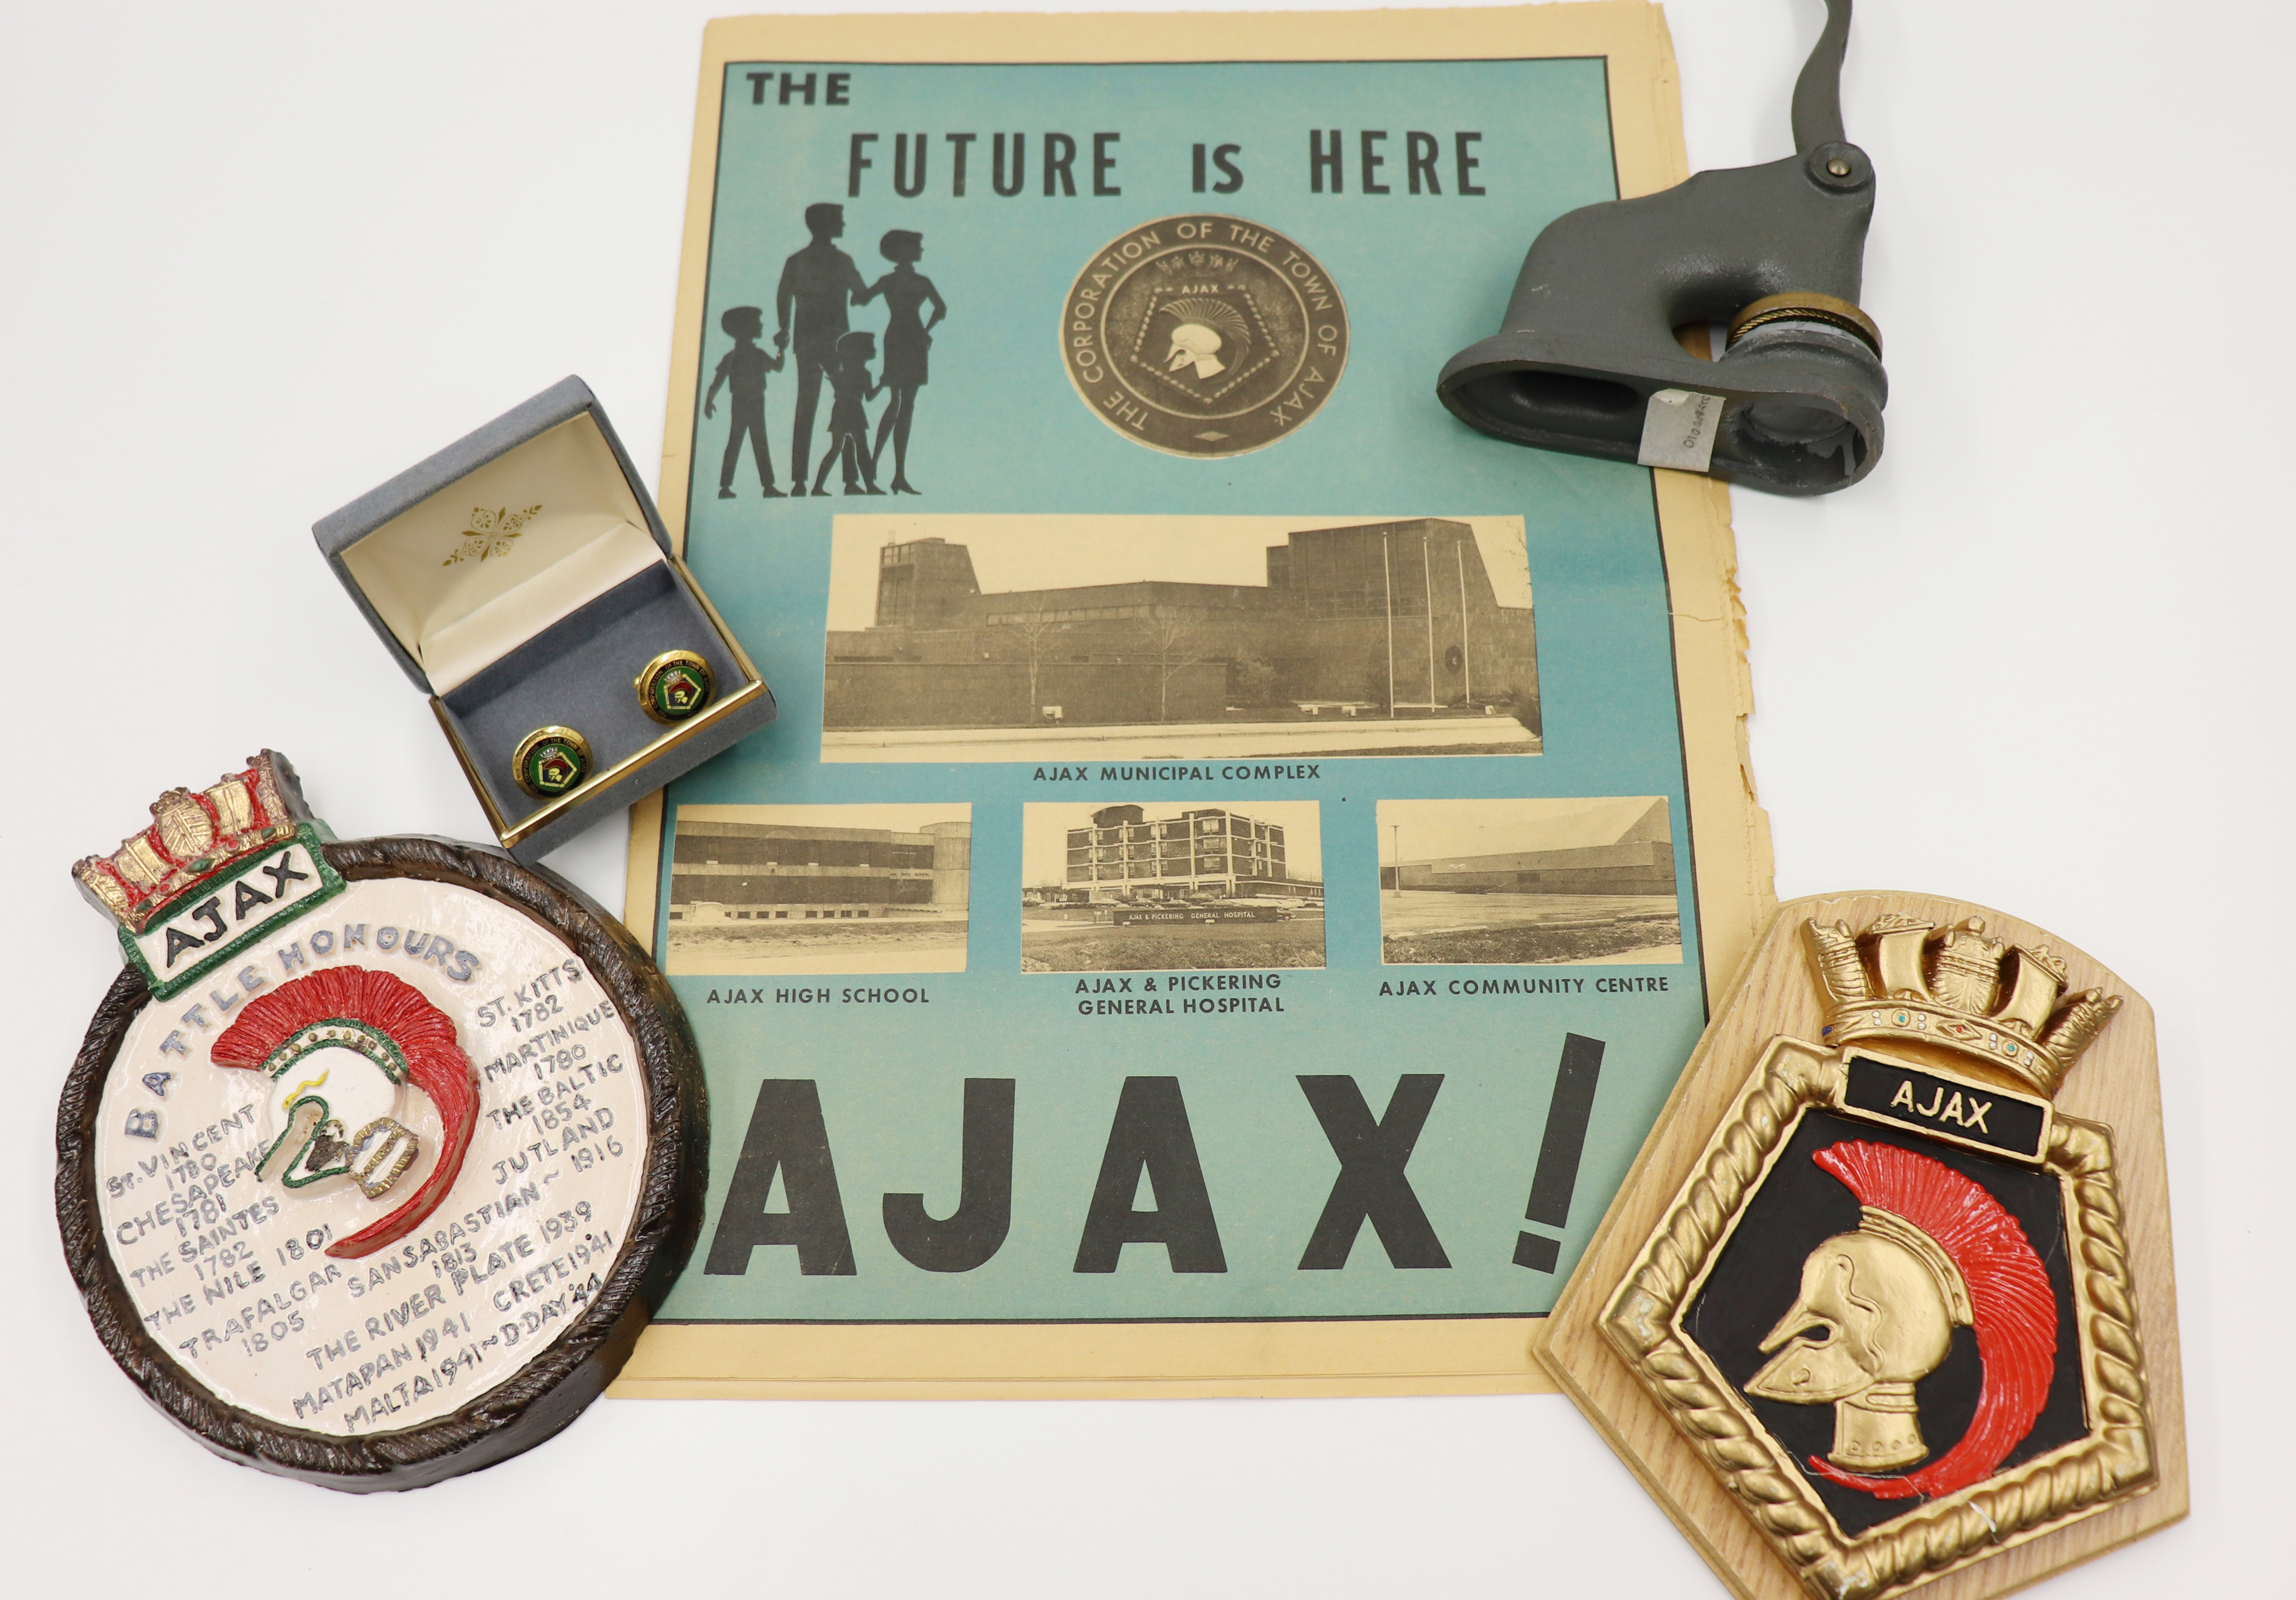 An image of items from Ajax Archives, including a Town of Ajax pamphlet and various Ajax seals.